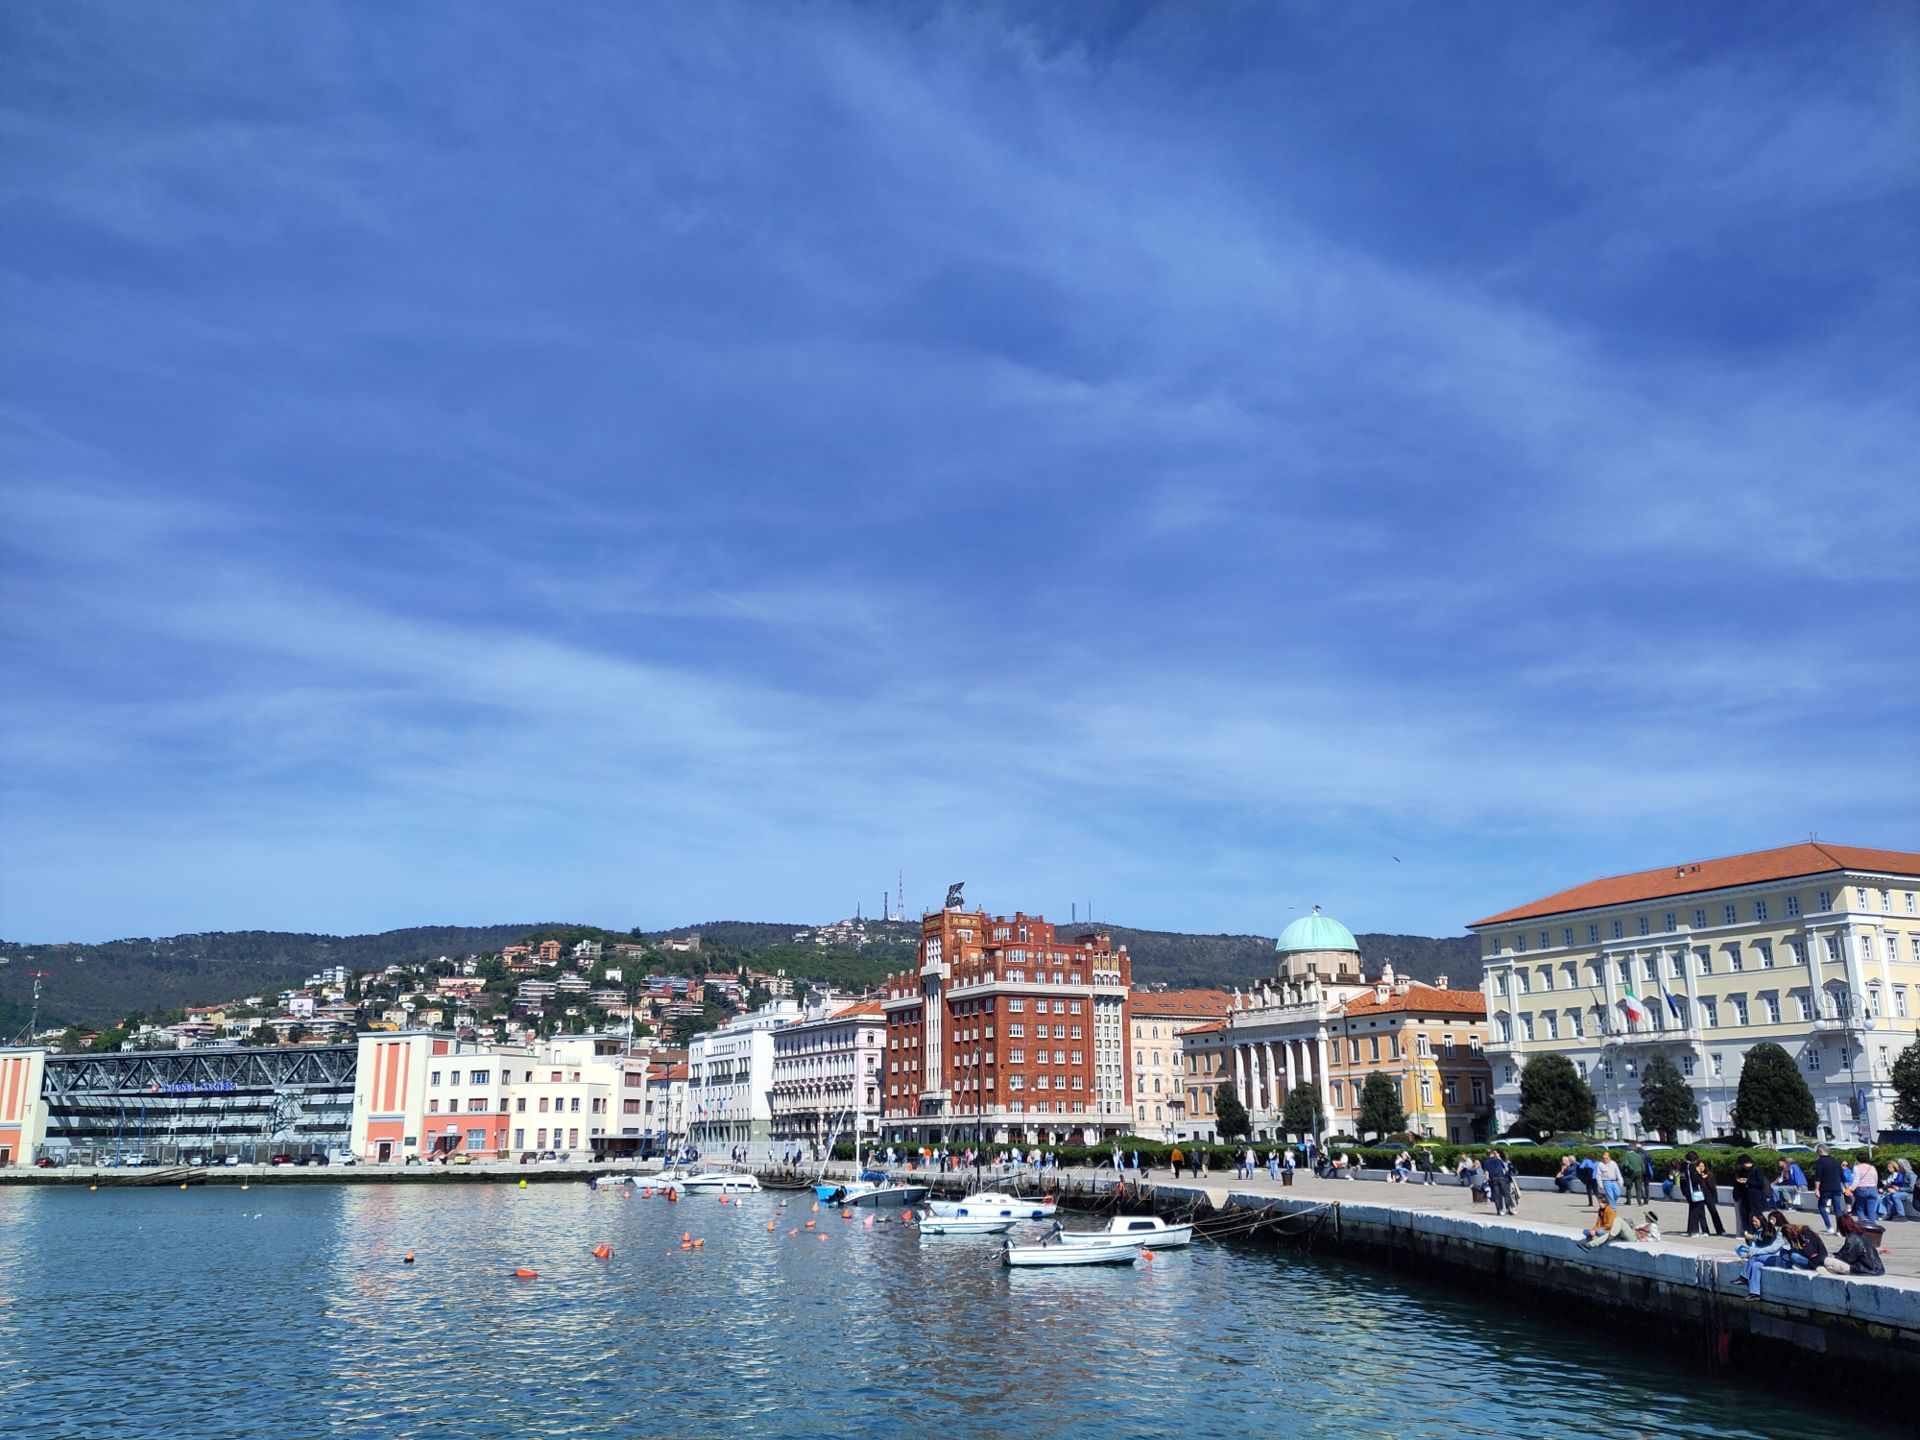 A view from the pier of the Trieste shoreline, on a very sunny day.